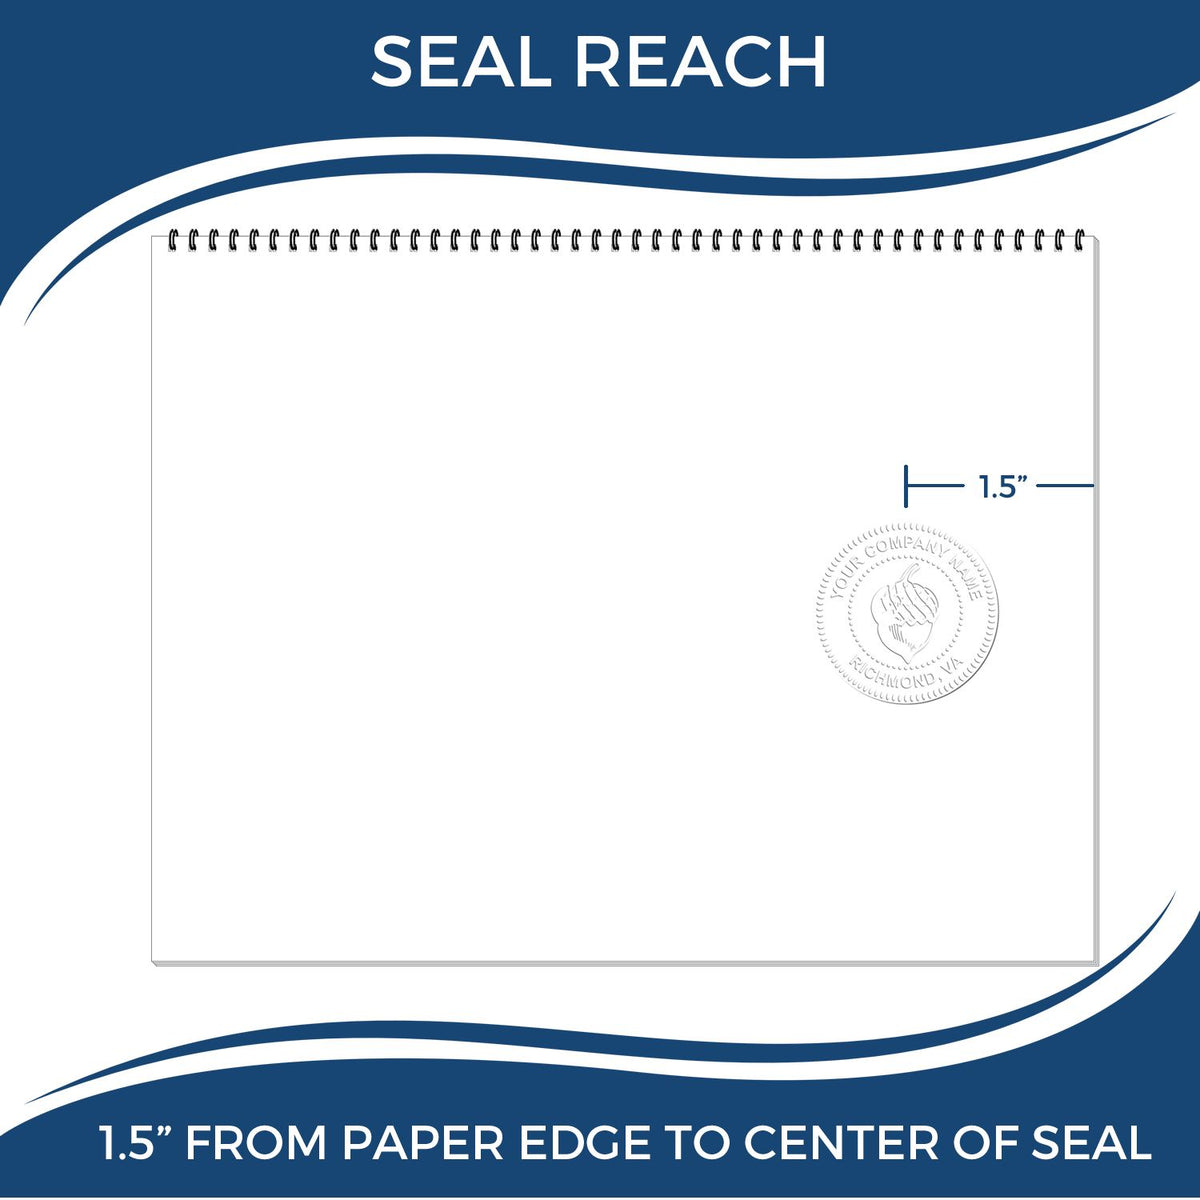 An infographic showing the seal reach which is represented by a ruler and a miniature seal image of the Gift New Hampshire Engineer Seal